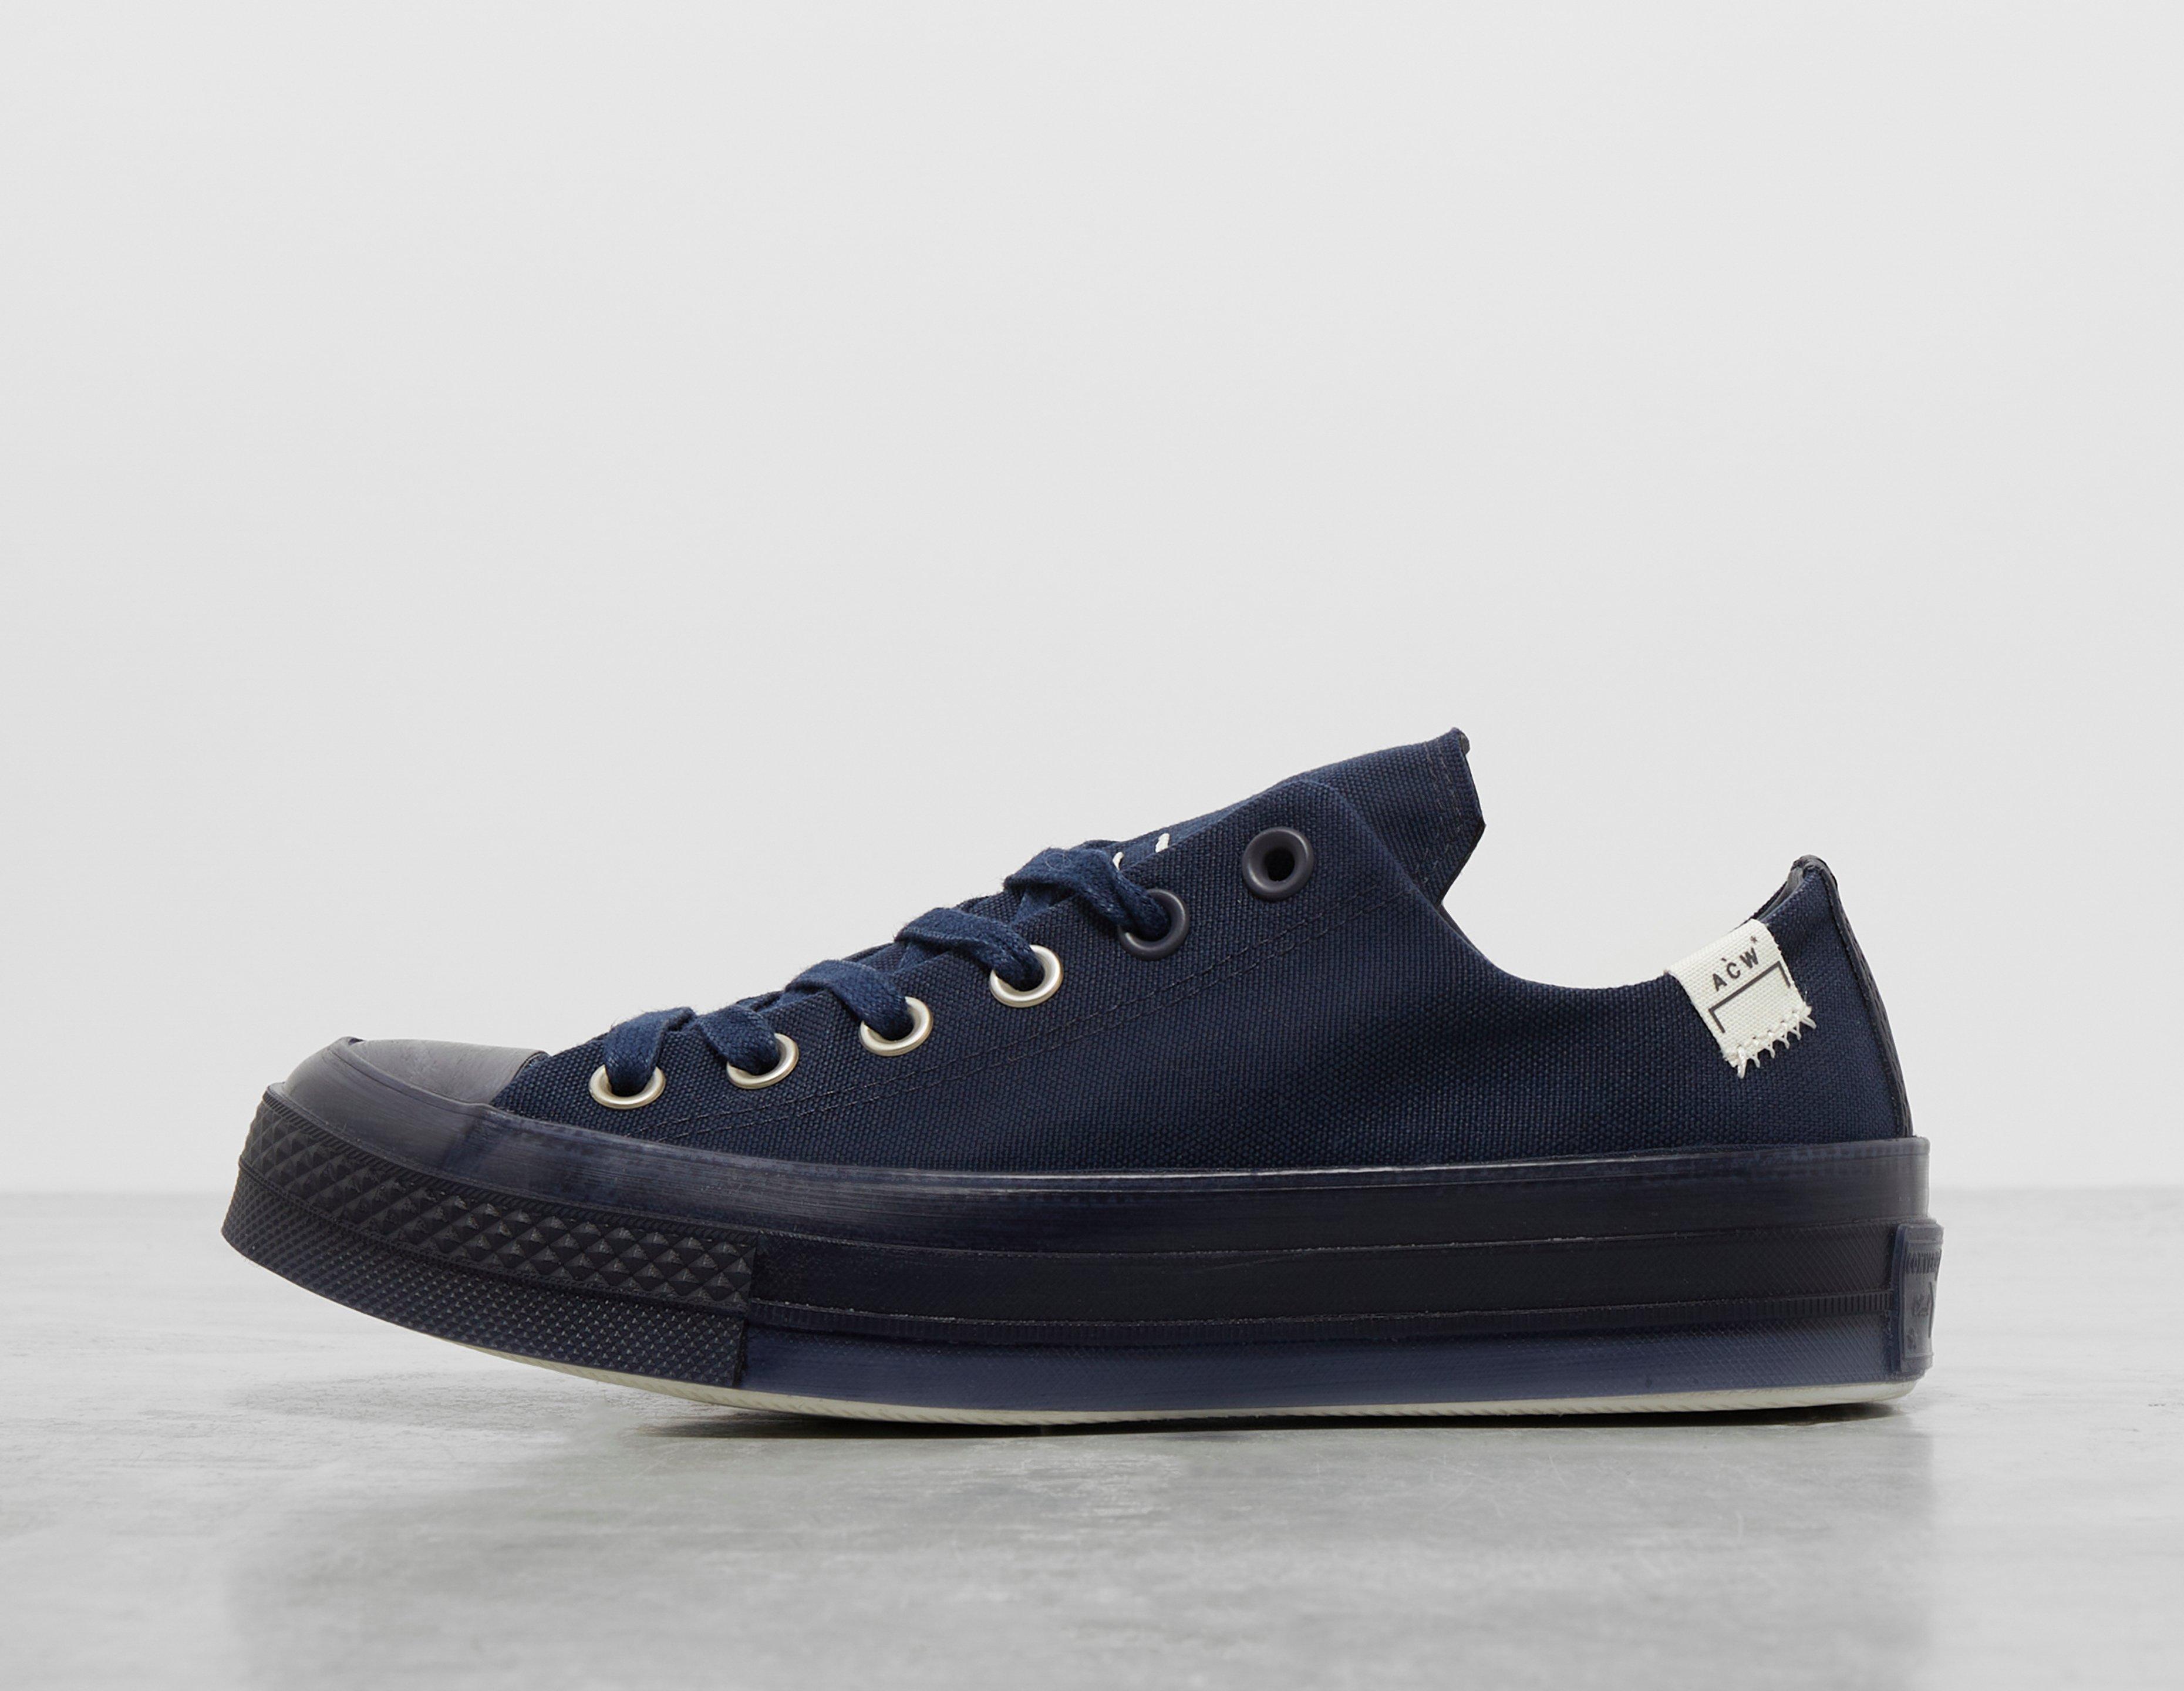 Suede Converse x A-COLD-WALL Chuck Taylor 70 Ox Women's